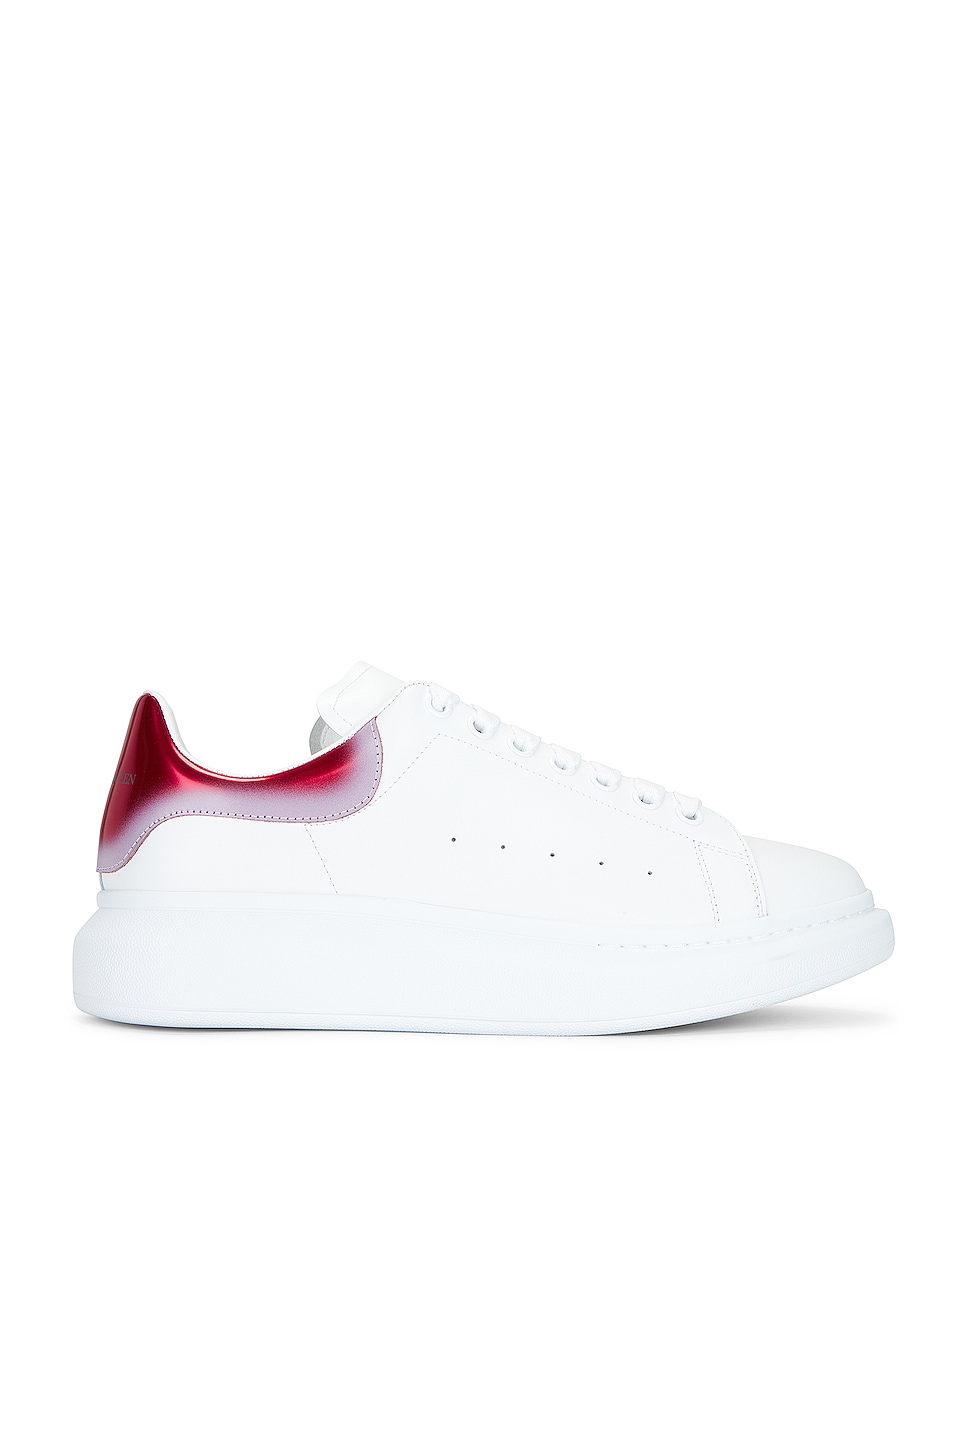 Image 1 of Alexander McQueen Oversized Sneaker in White, Ruby Red, & Silver